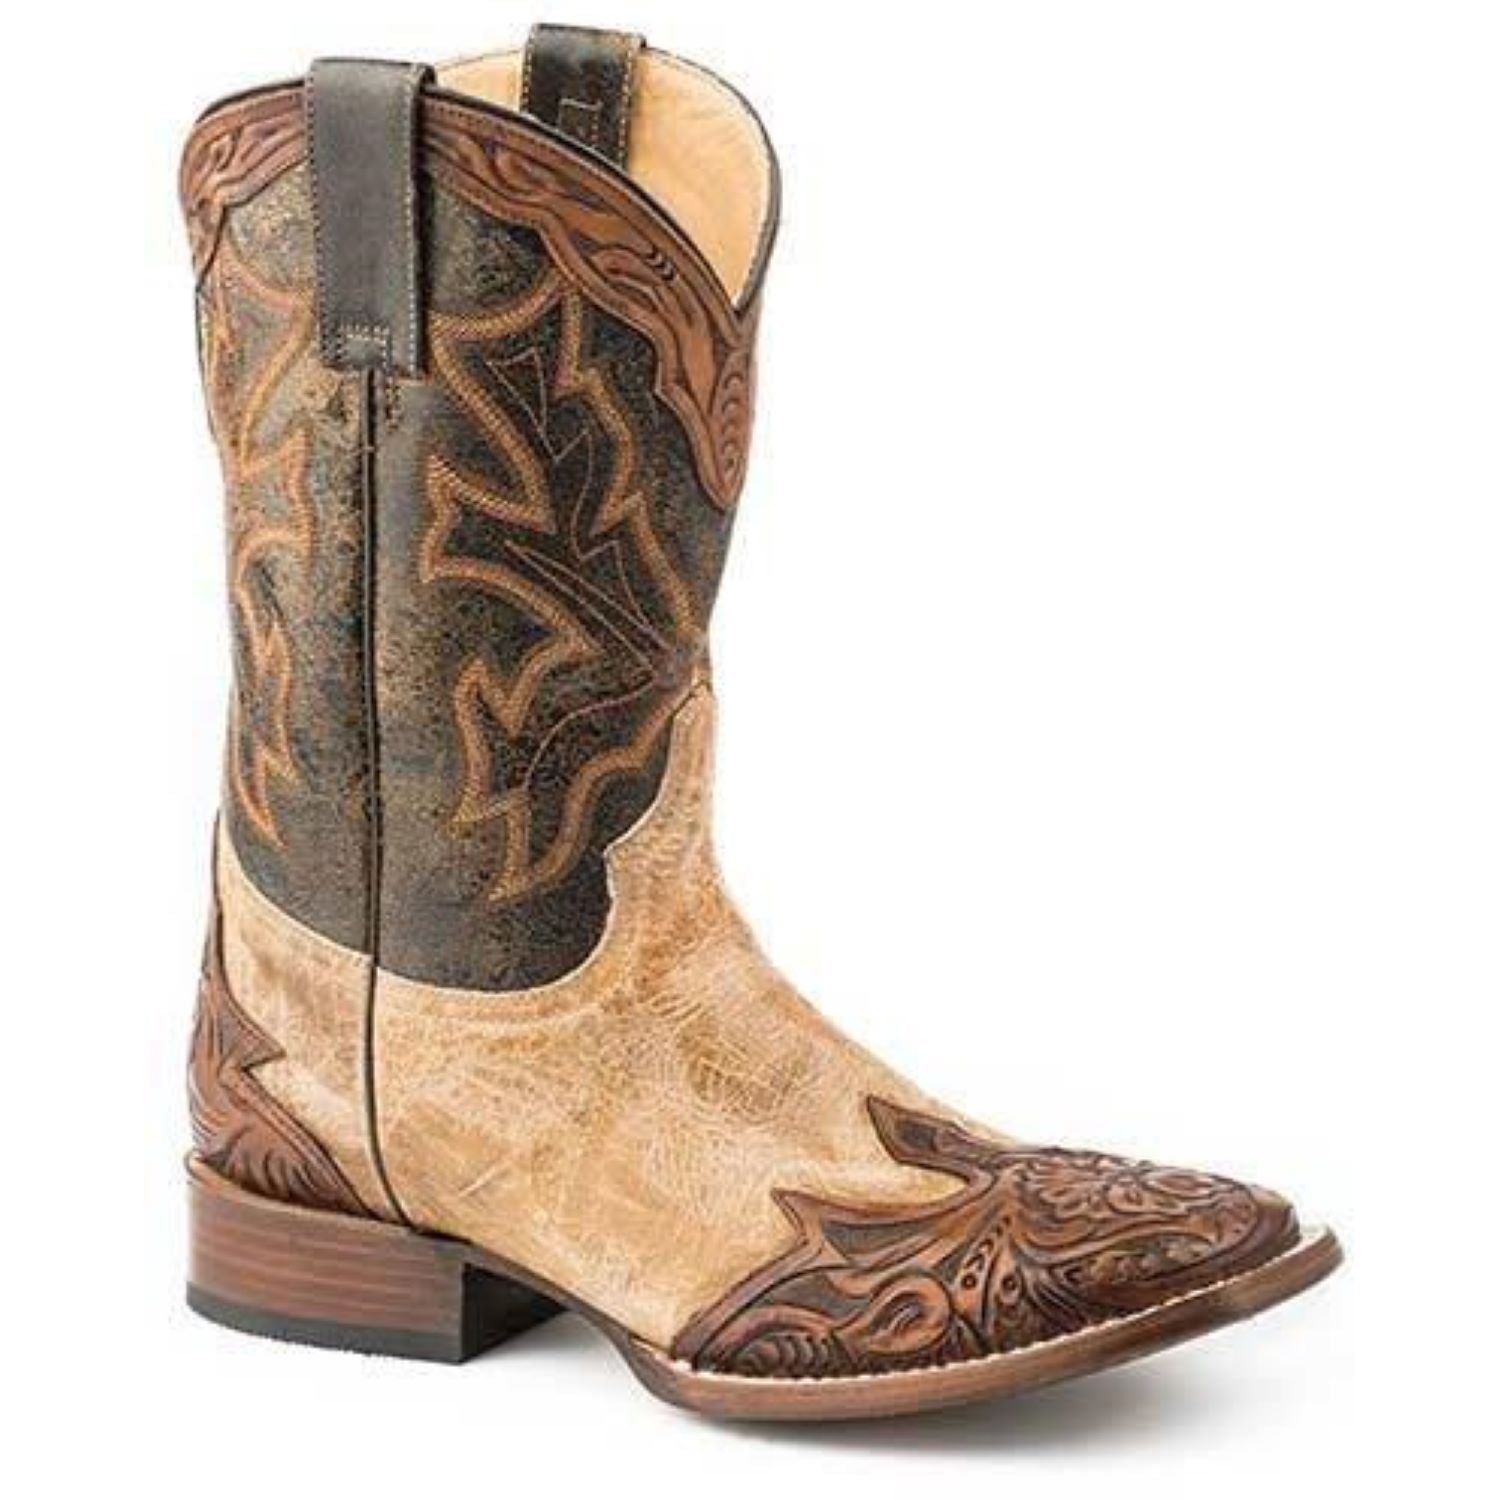 Men's Stetson Julian Hand Tooled Leather Boots Handcrafted Tan - yeehawcowboy